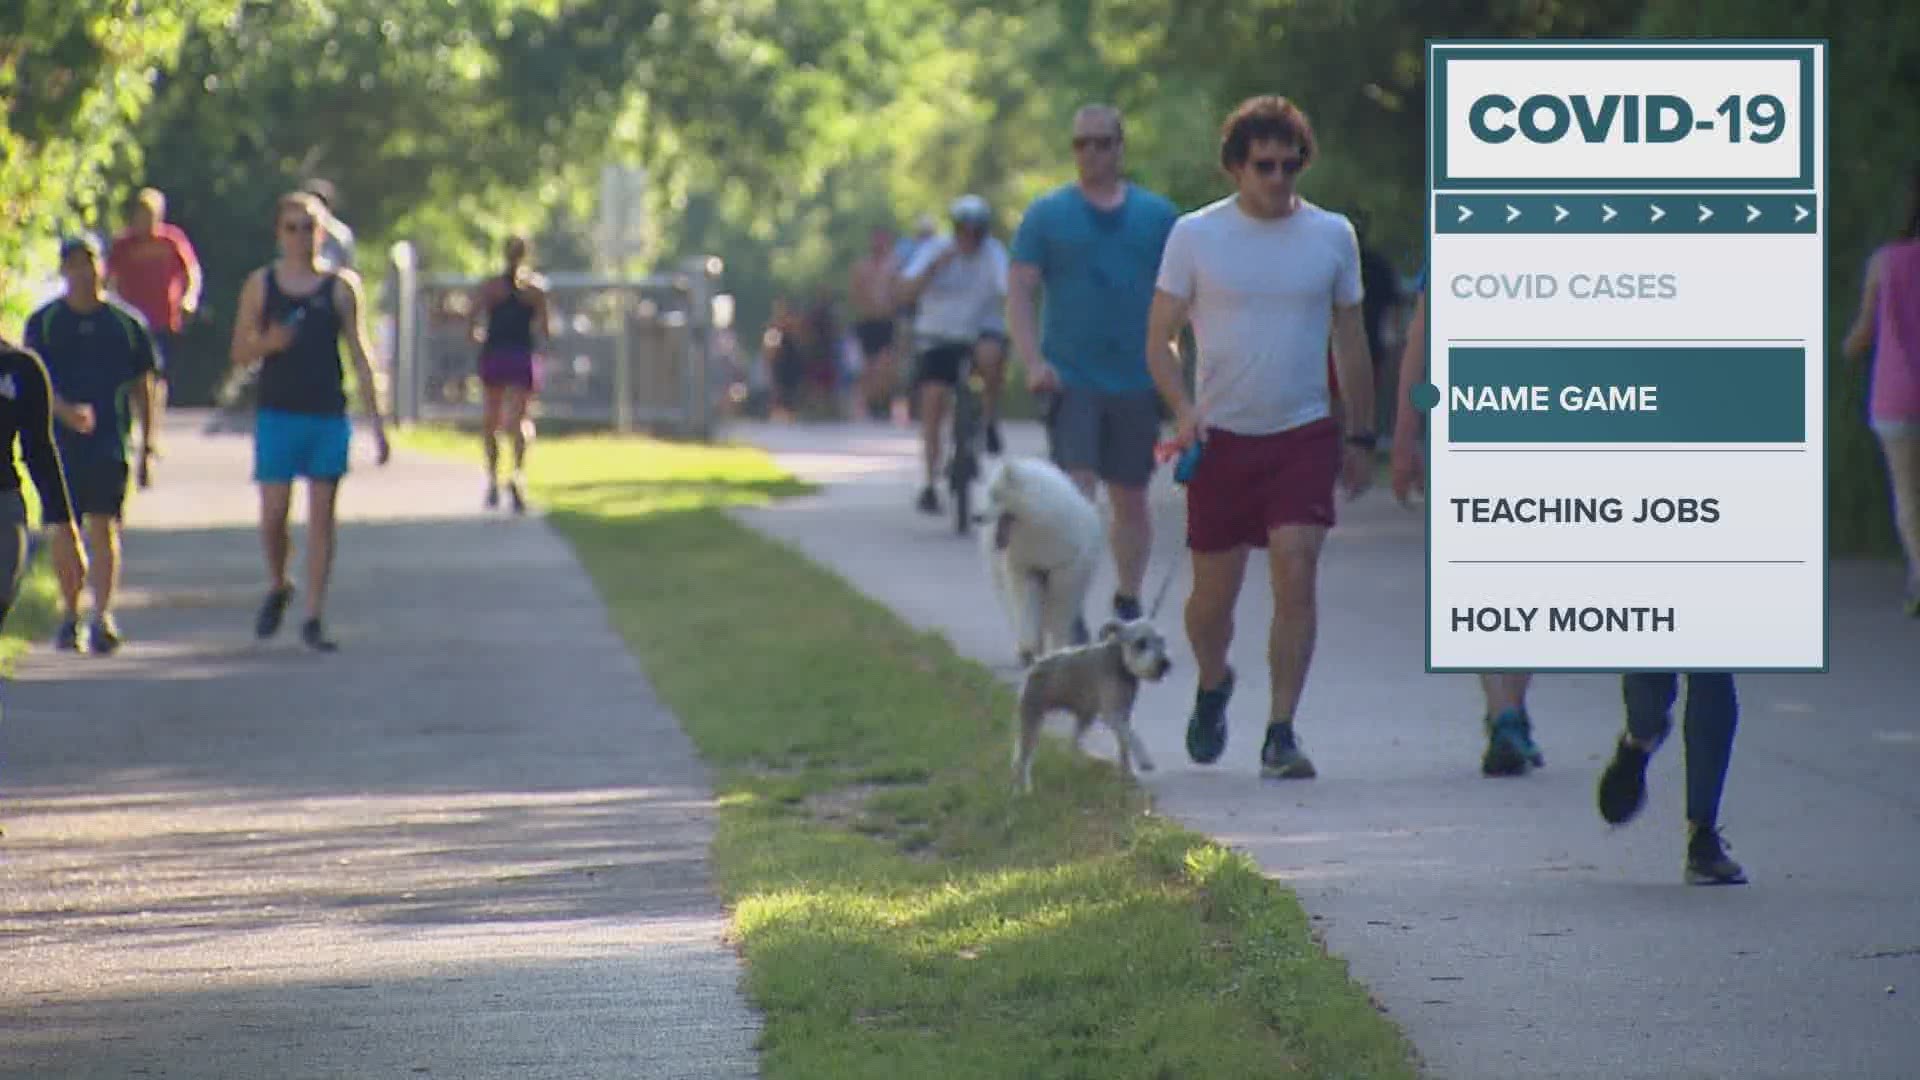 North Texas has more than 6,000 reported cases of COVID-19. In Dallas County, new guidelines will begin Thursday at the Katy Trail in efforts to control crowds.